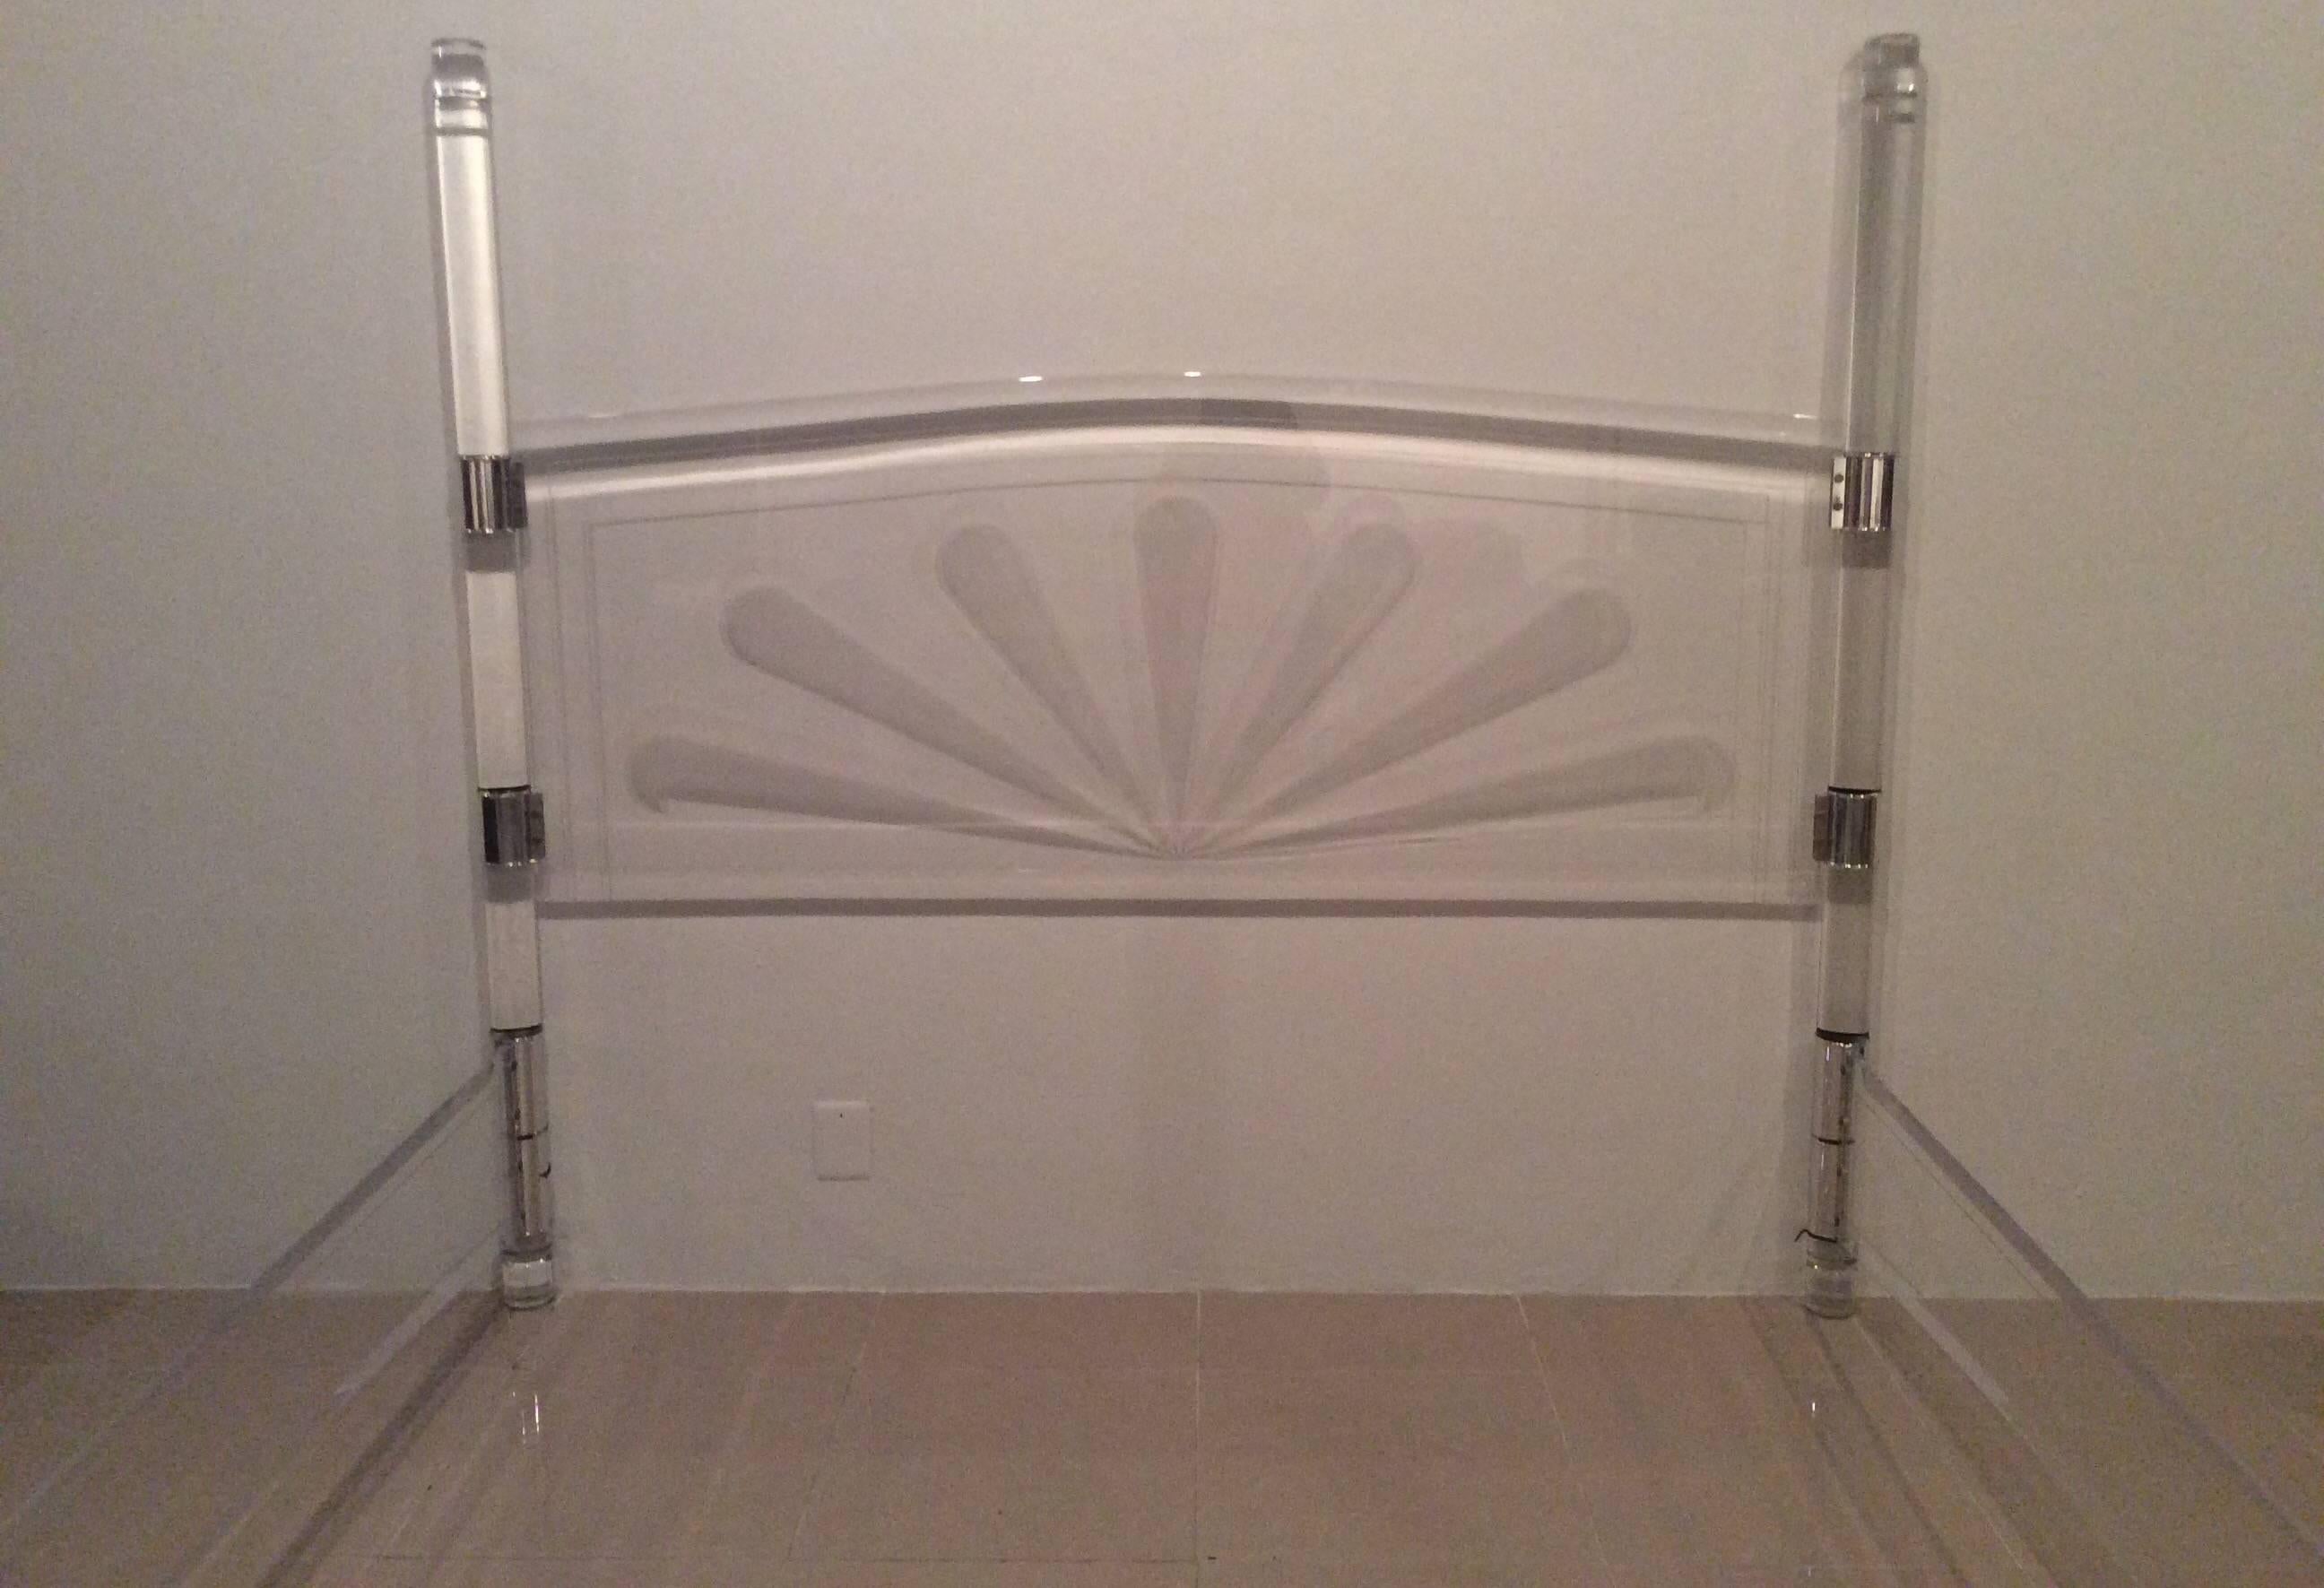 20th Century Lucite and Chrome Four Post Canopy Bed King Size Vintage Headboard Midcentury